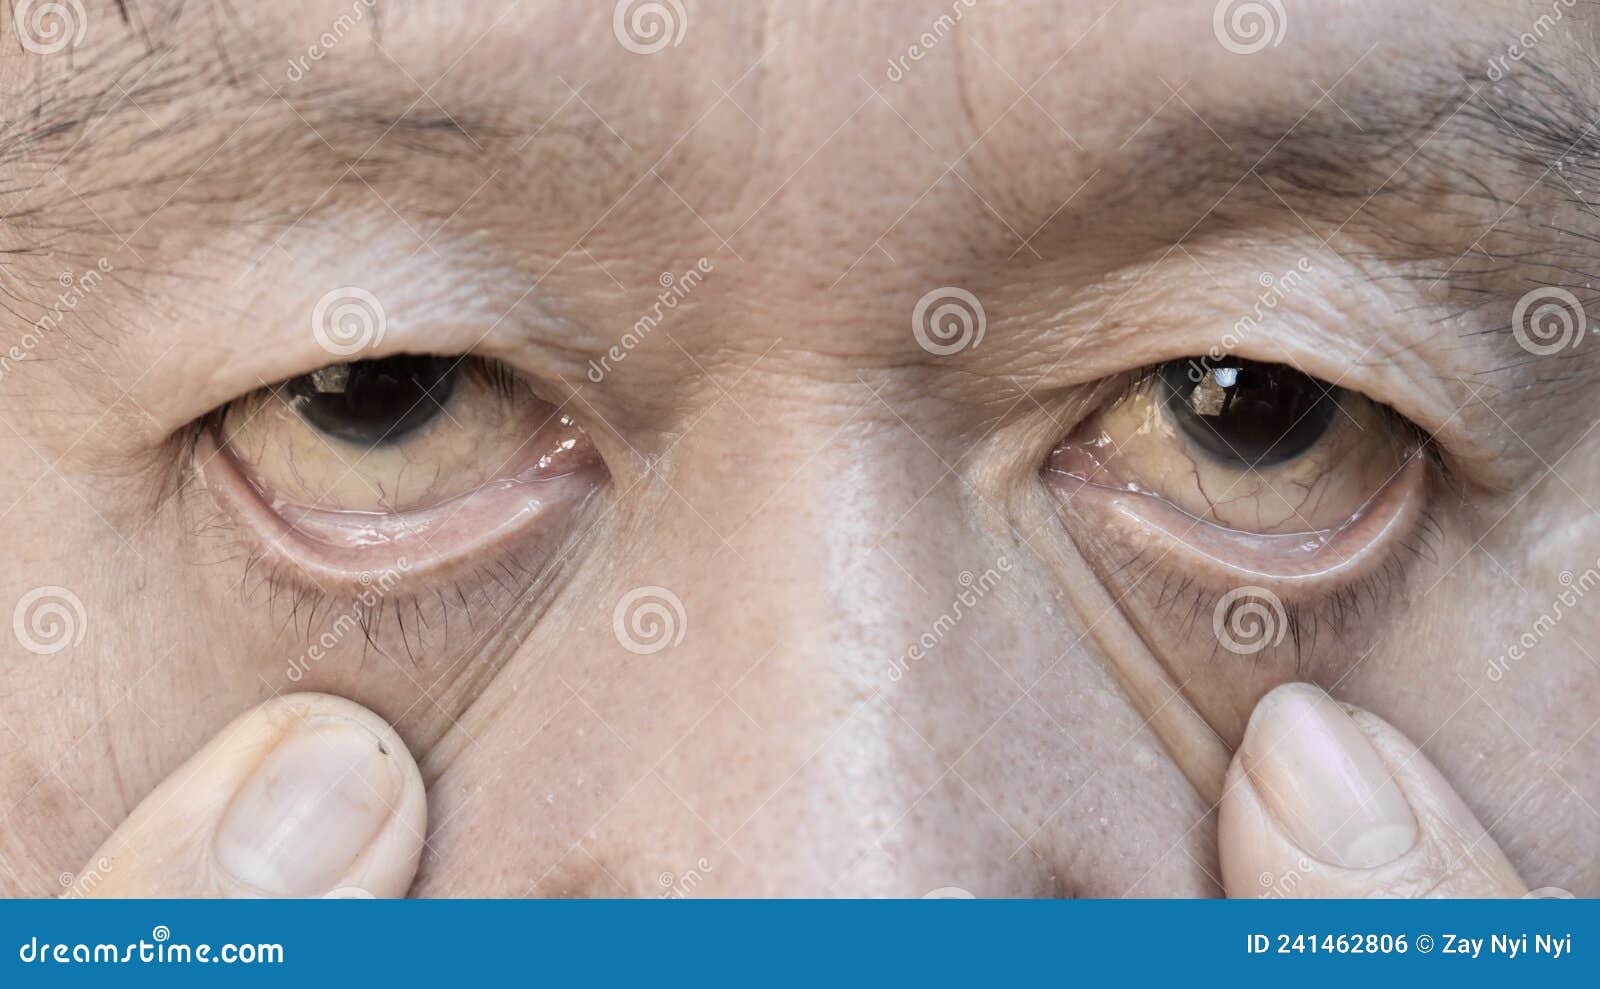 pale skin of asian man. sign of anemia. pallor at eyelid